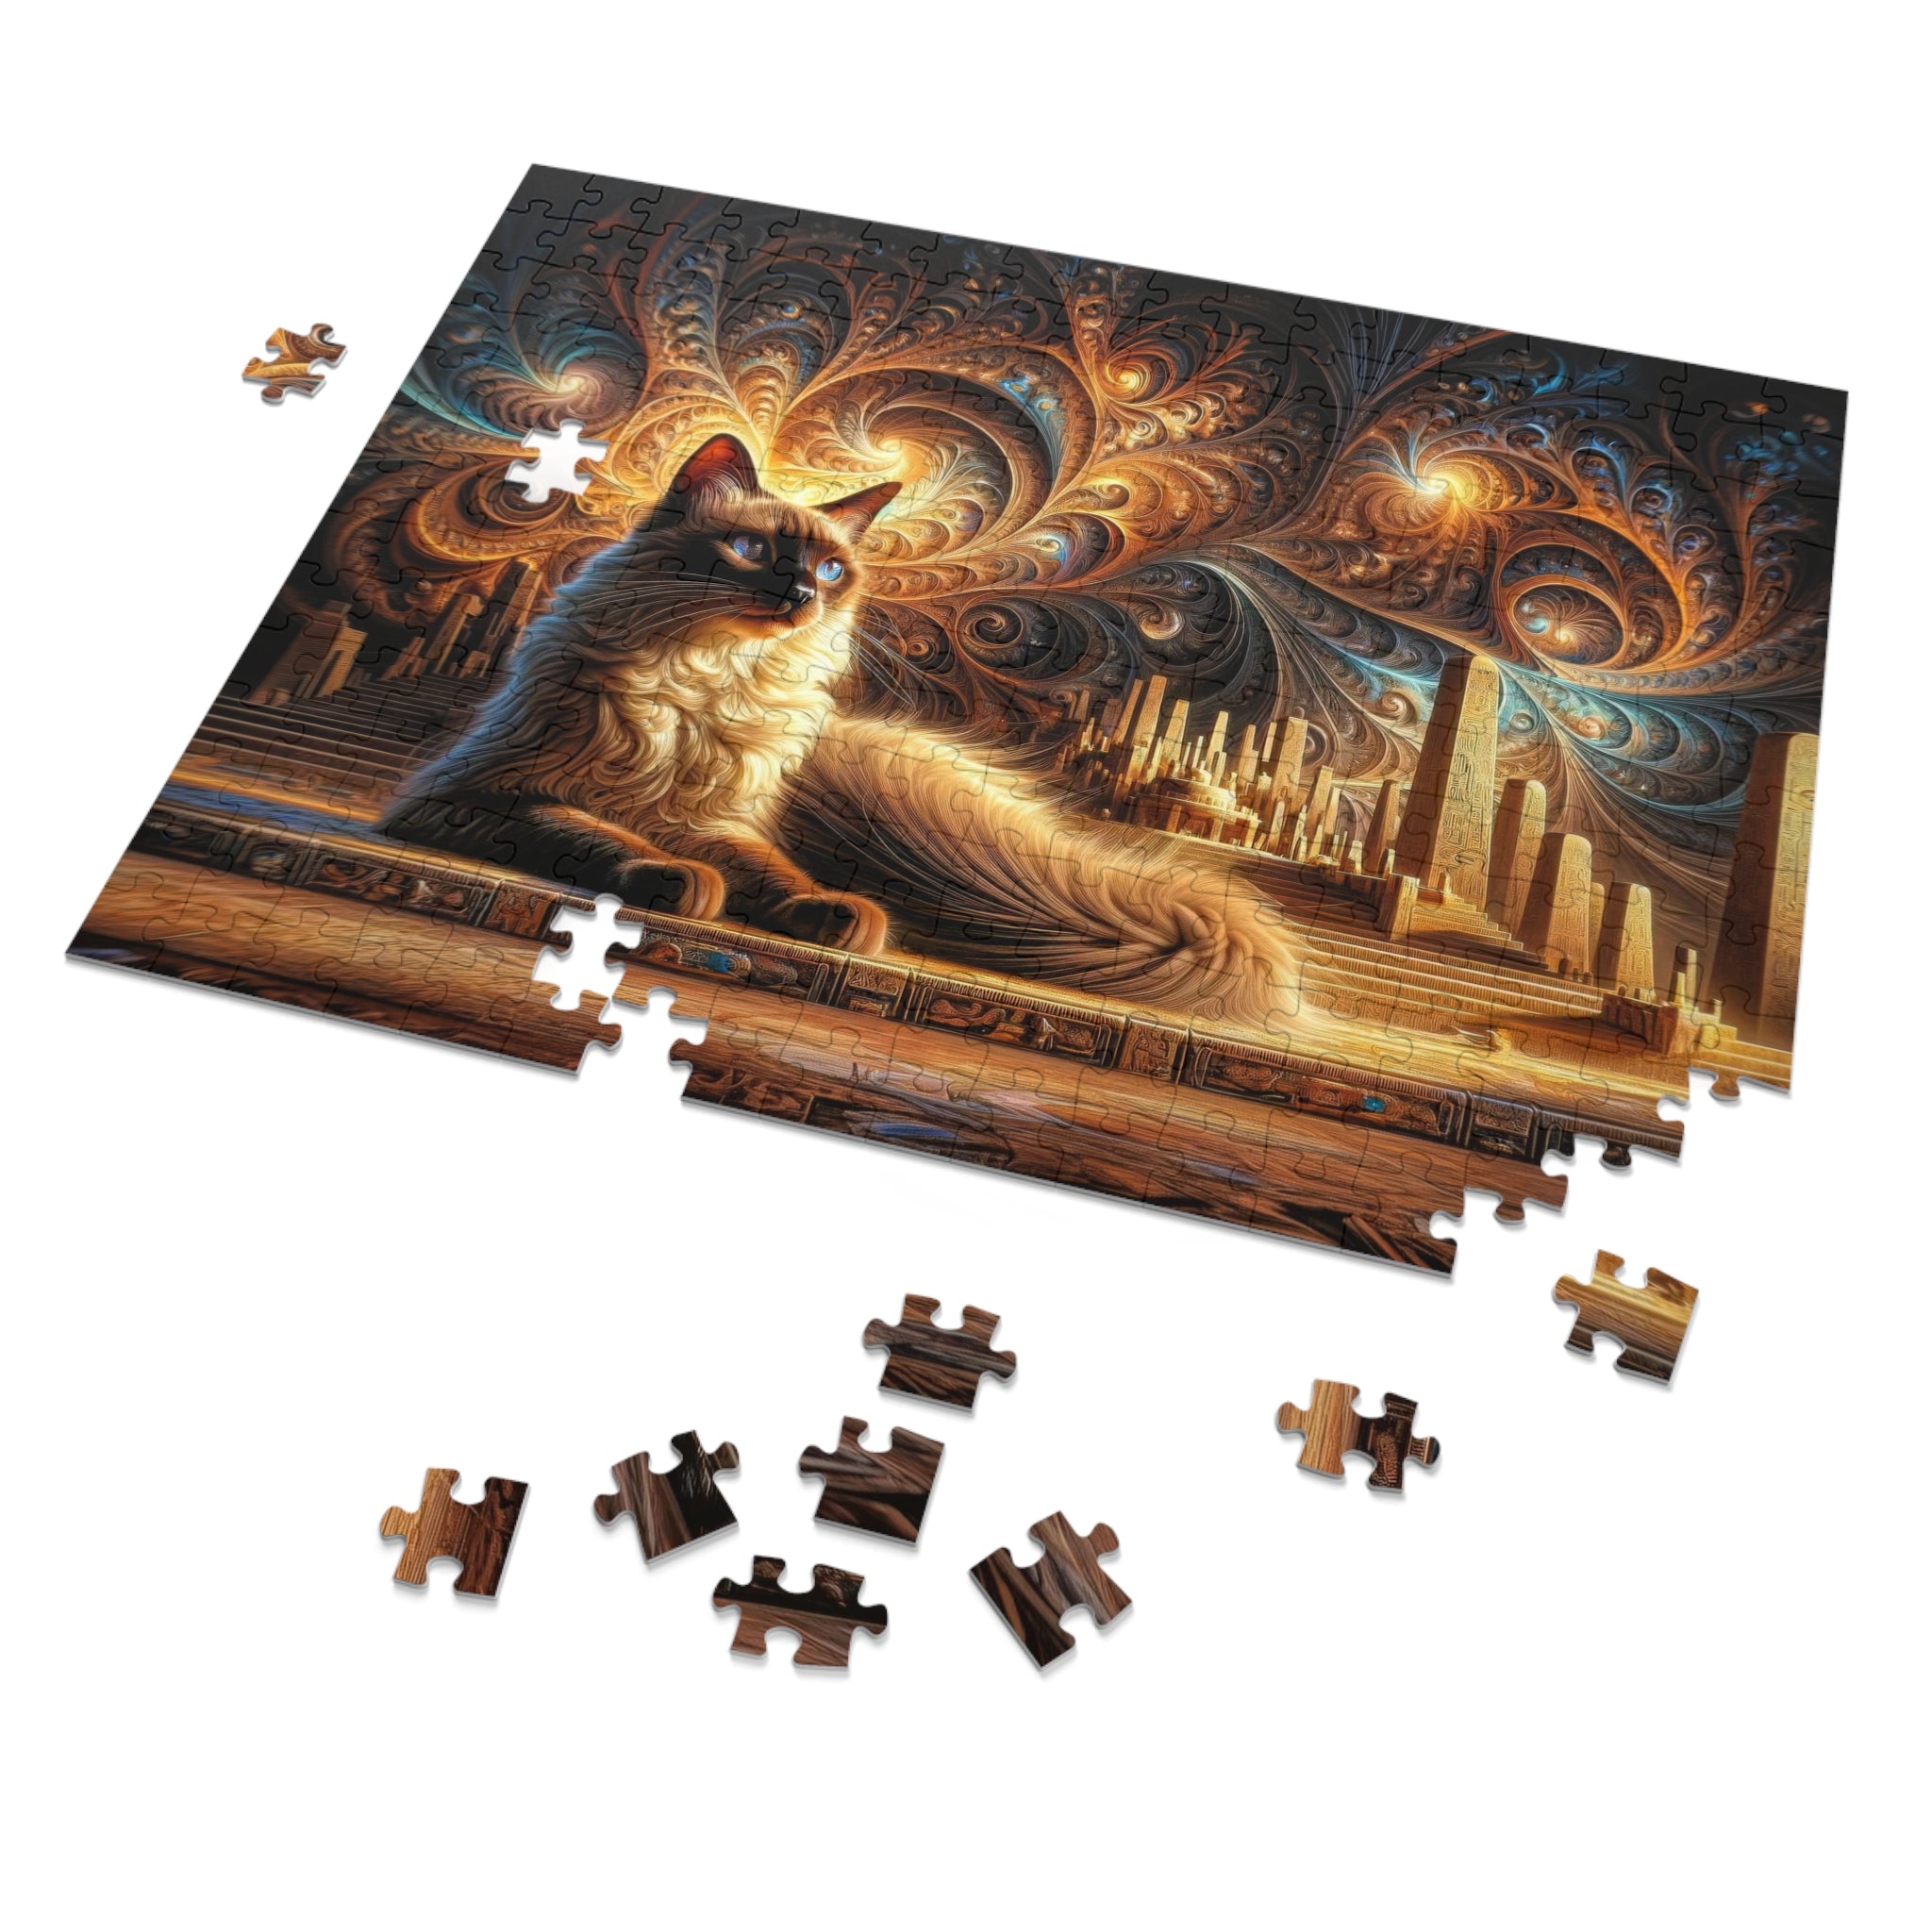 The Watcher of the Eternal Sands Puzzle